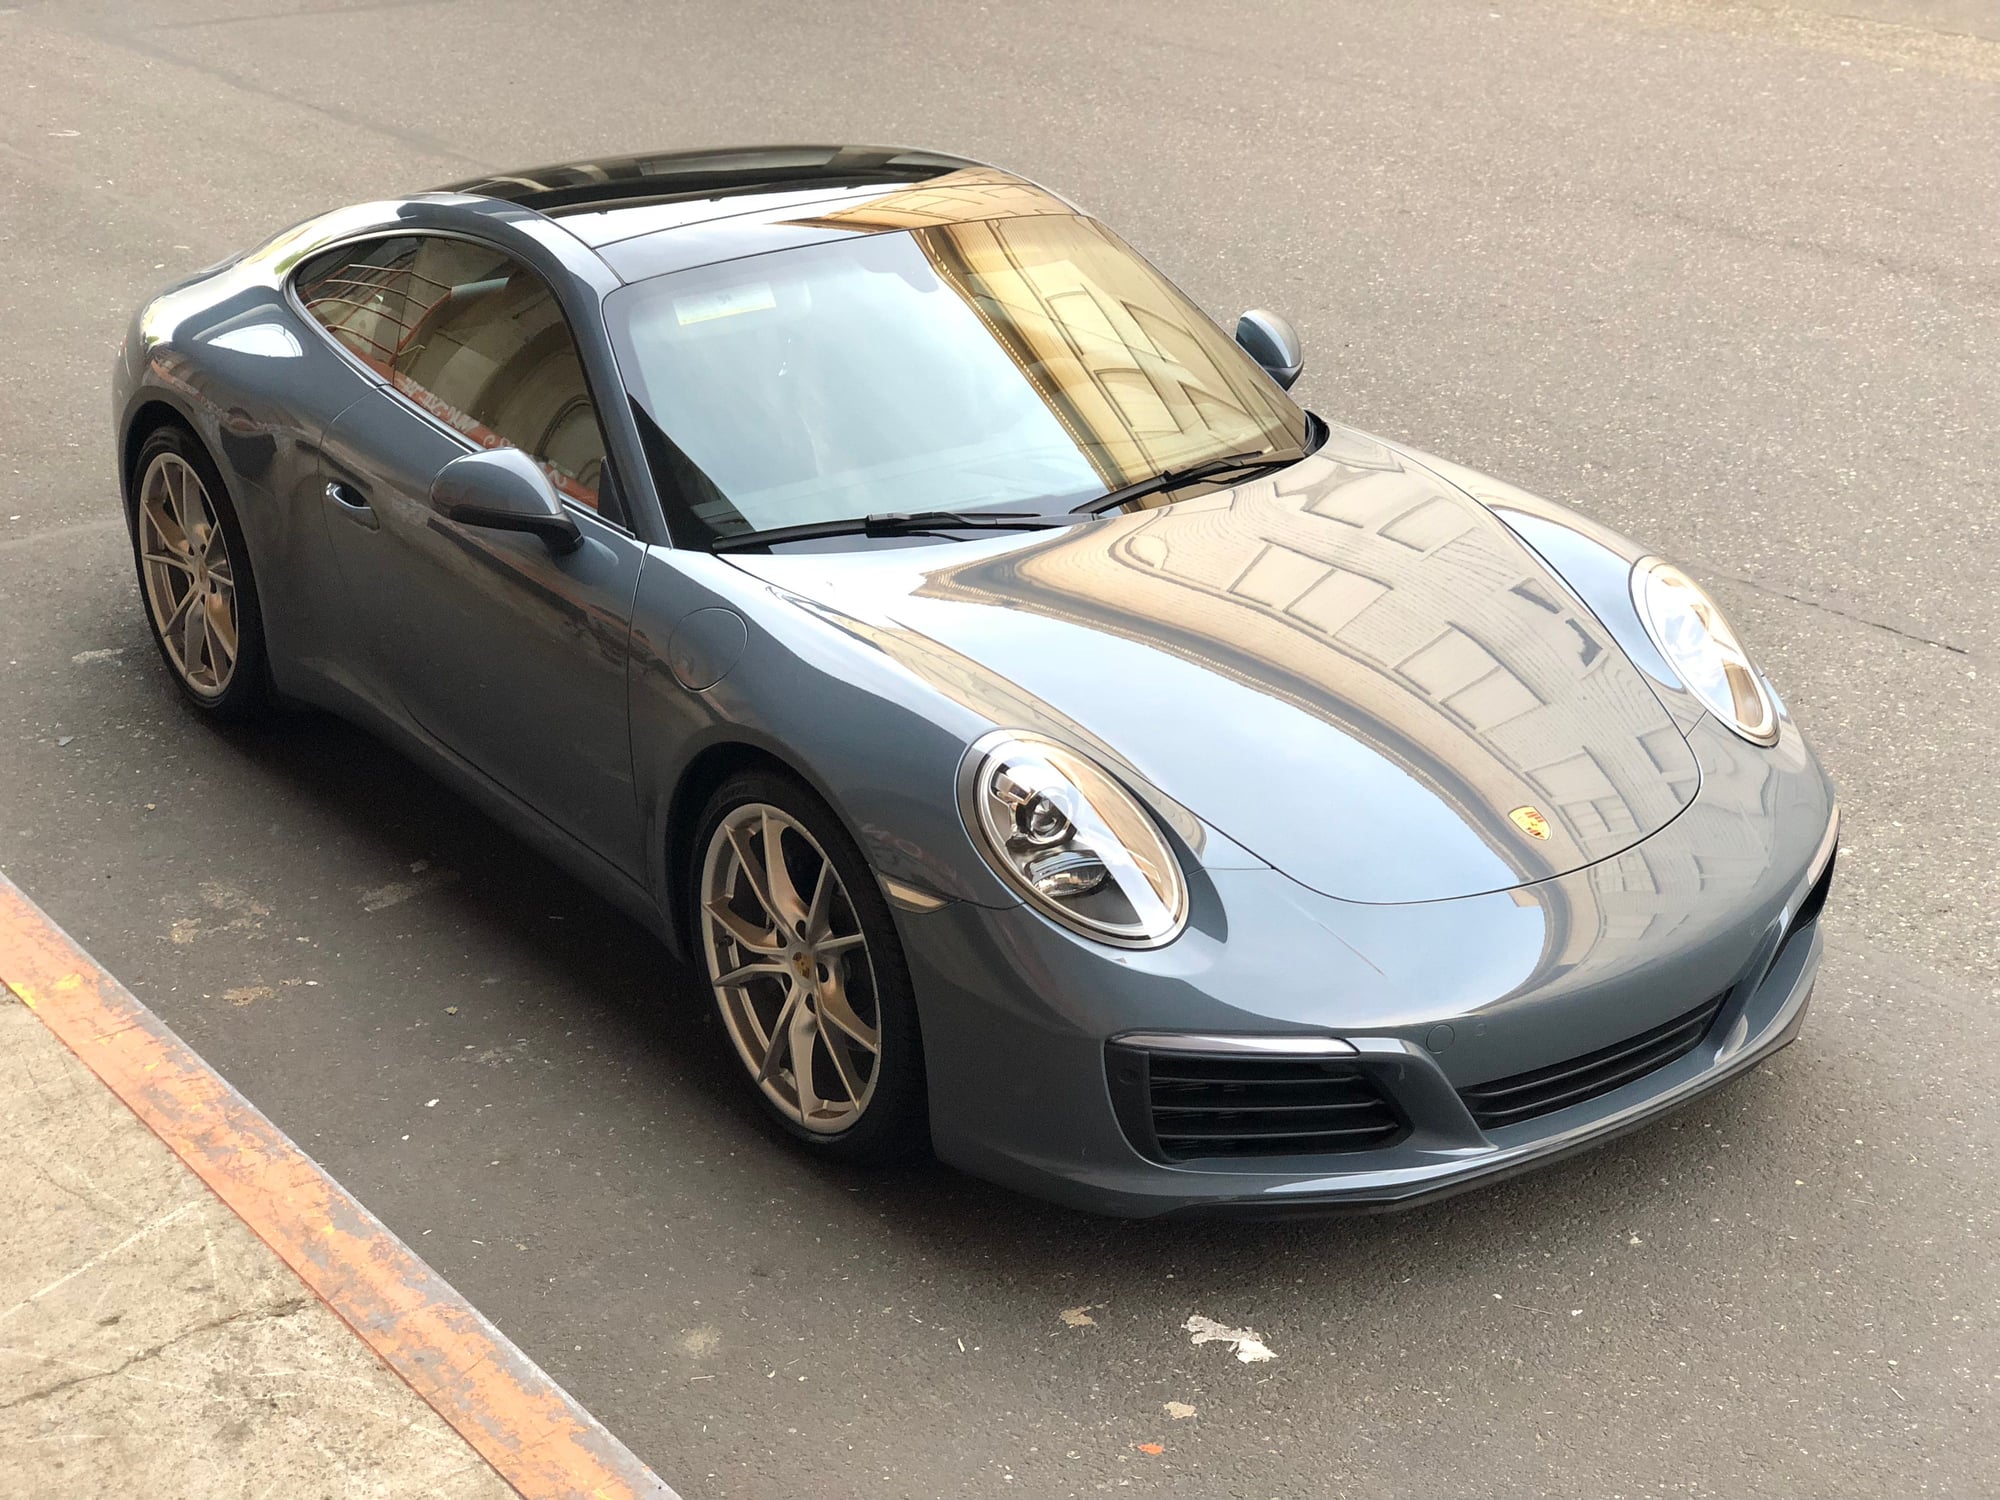 2017 Porsche 911 - 2017 Graphite Blue Metallic 'drivers' Carrera for sale - Used - VIN WP0AA2A91HS107049 - 6 cyl - 2WD - Manual - Coupe - Blue - Portland, OR 97213, United States